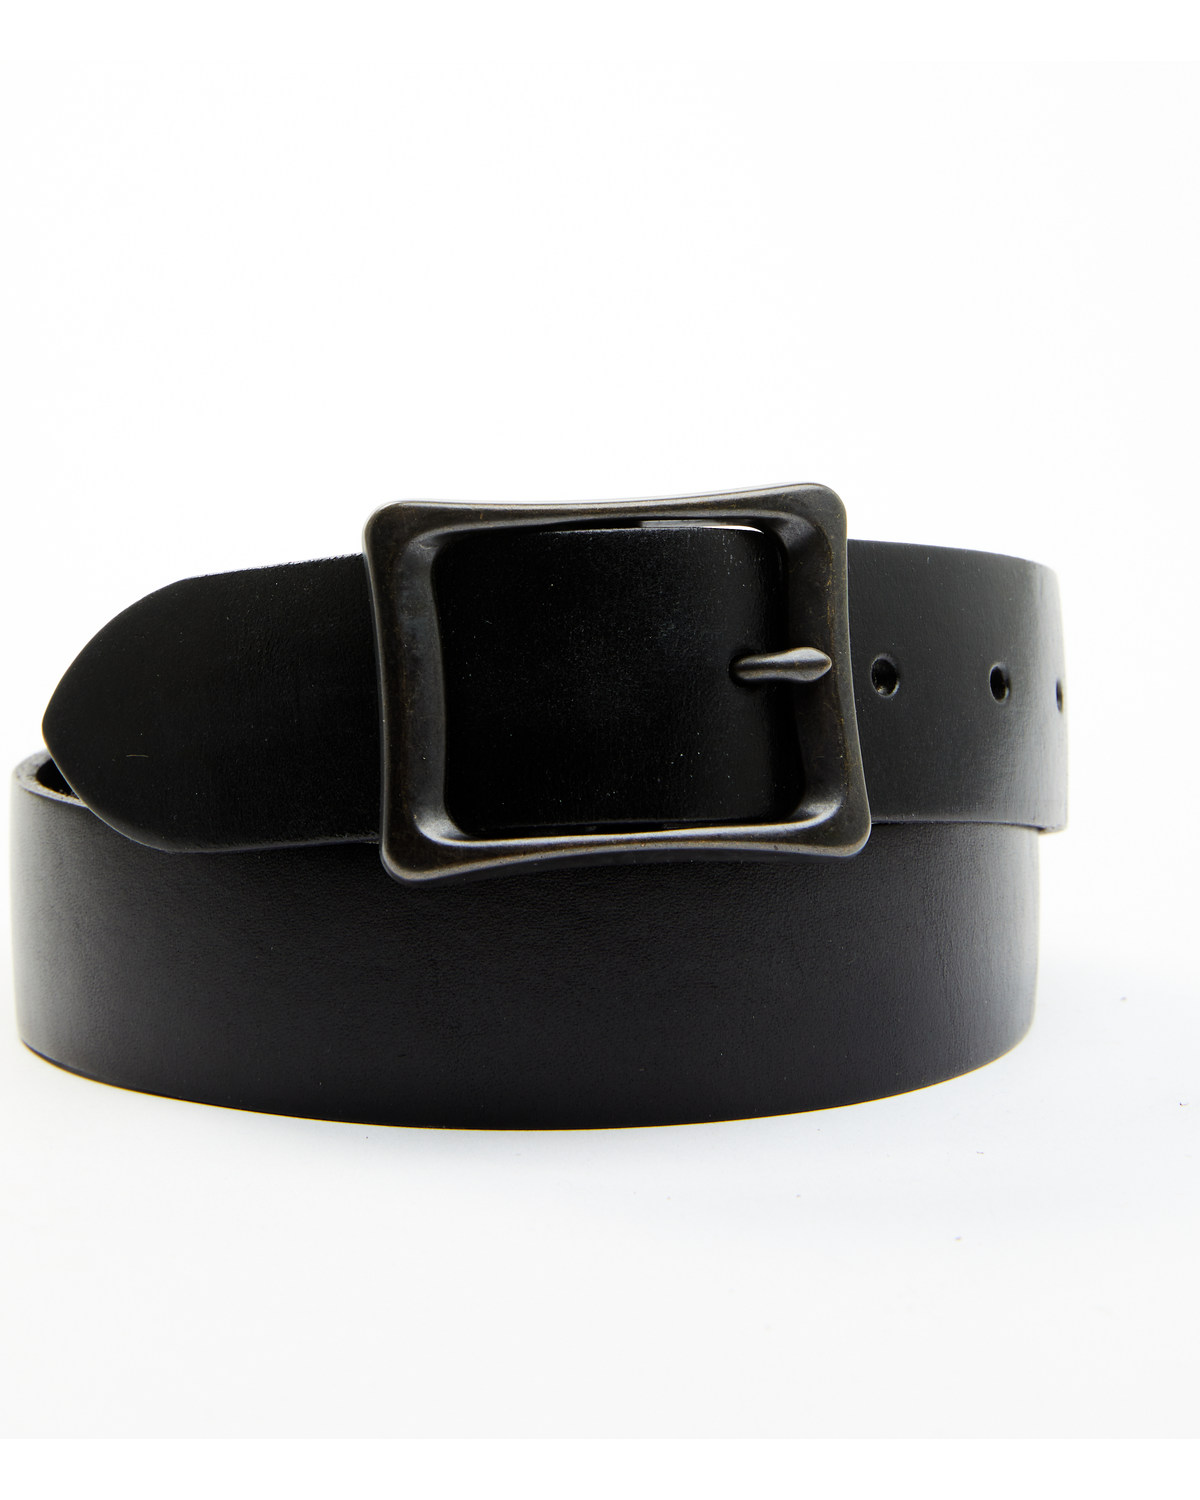 Brothers and Sons Men's Burnished Leather Belt